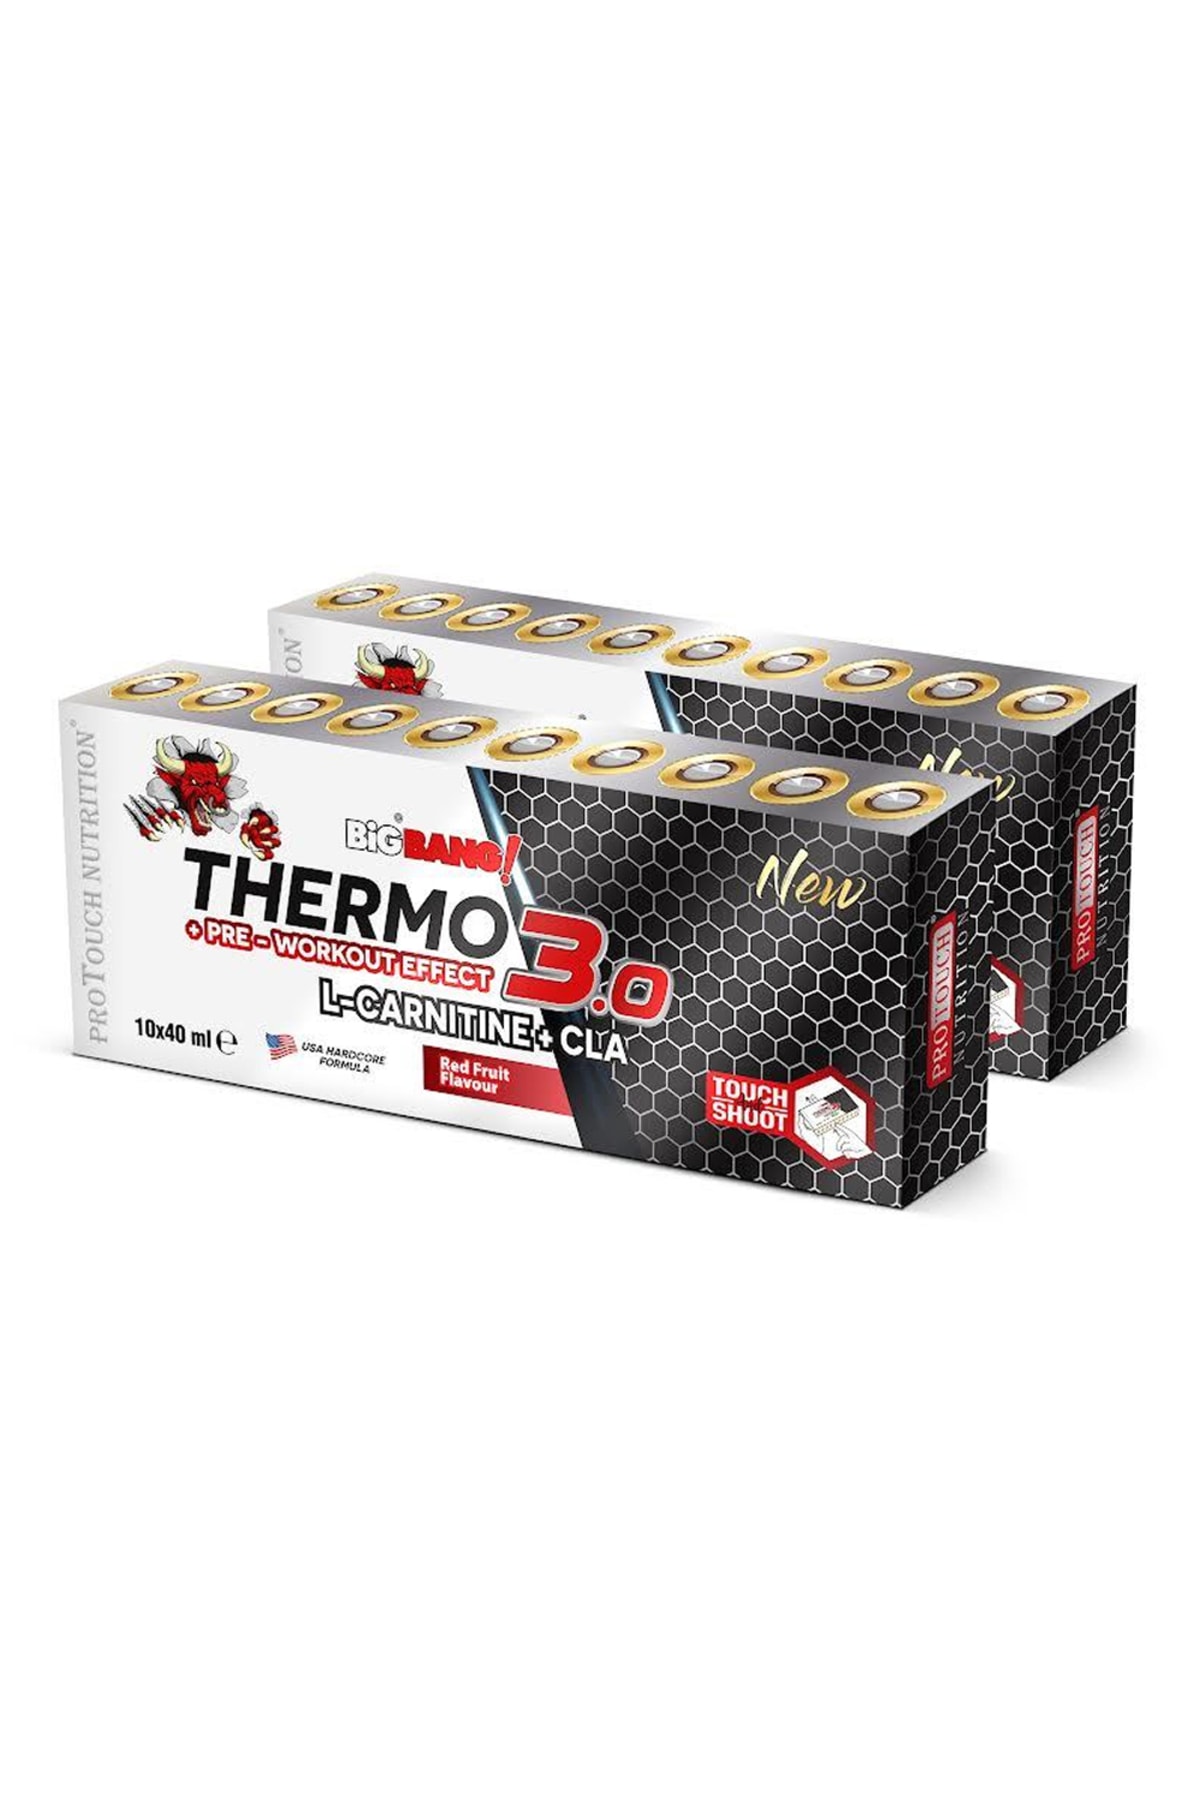 Protouch Nutrition Protouch Big Bang Thermo 3.0 L-carnitine Cla 20 Ampül